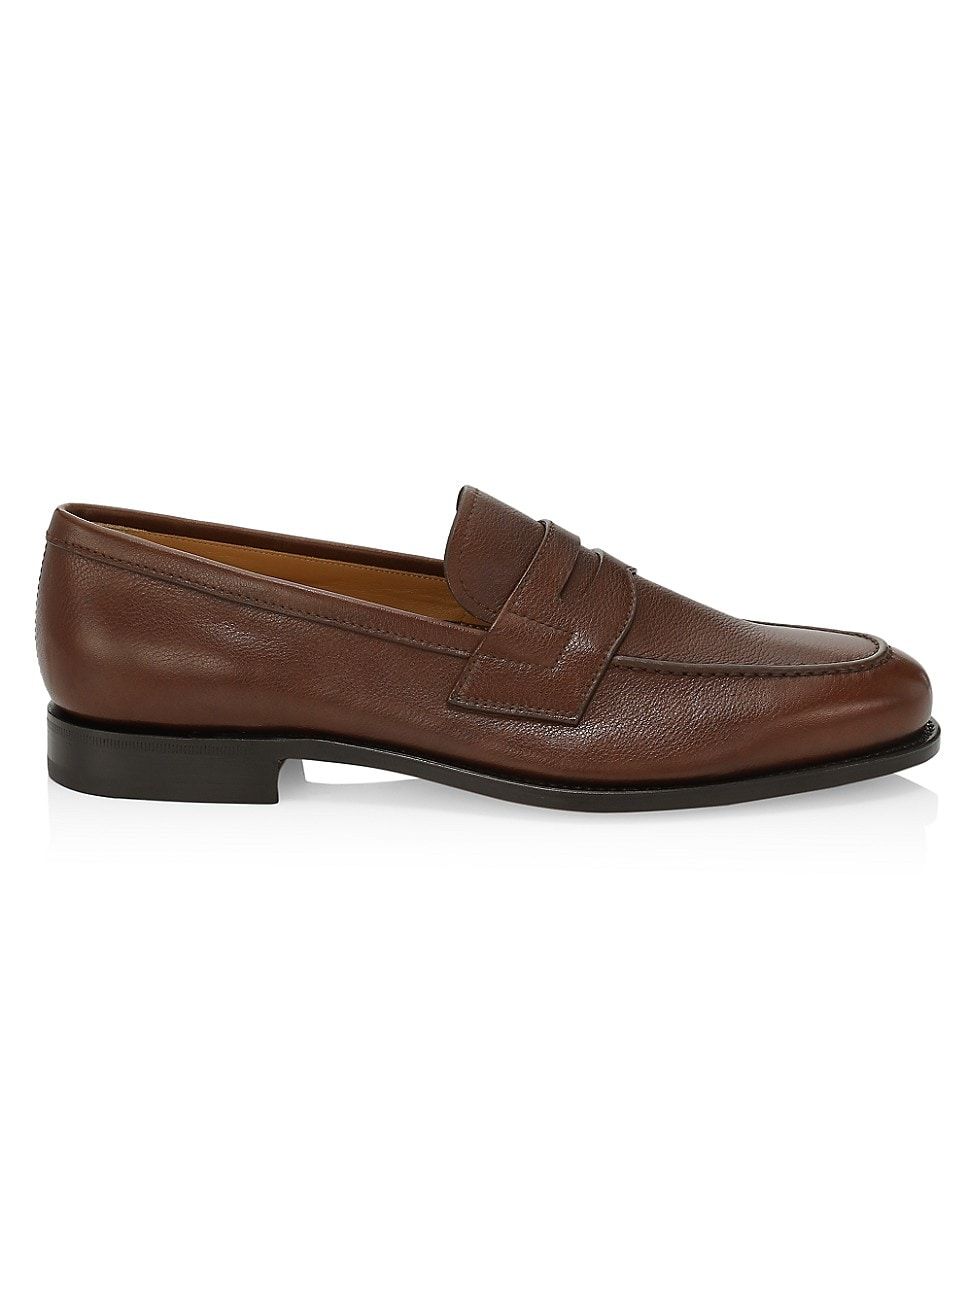 Men's Heswall Leather Loafers - Brunt